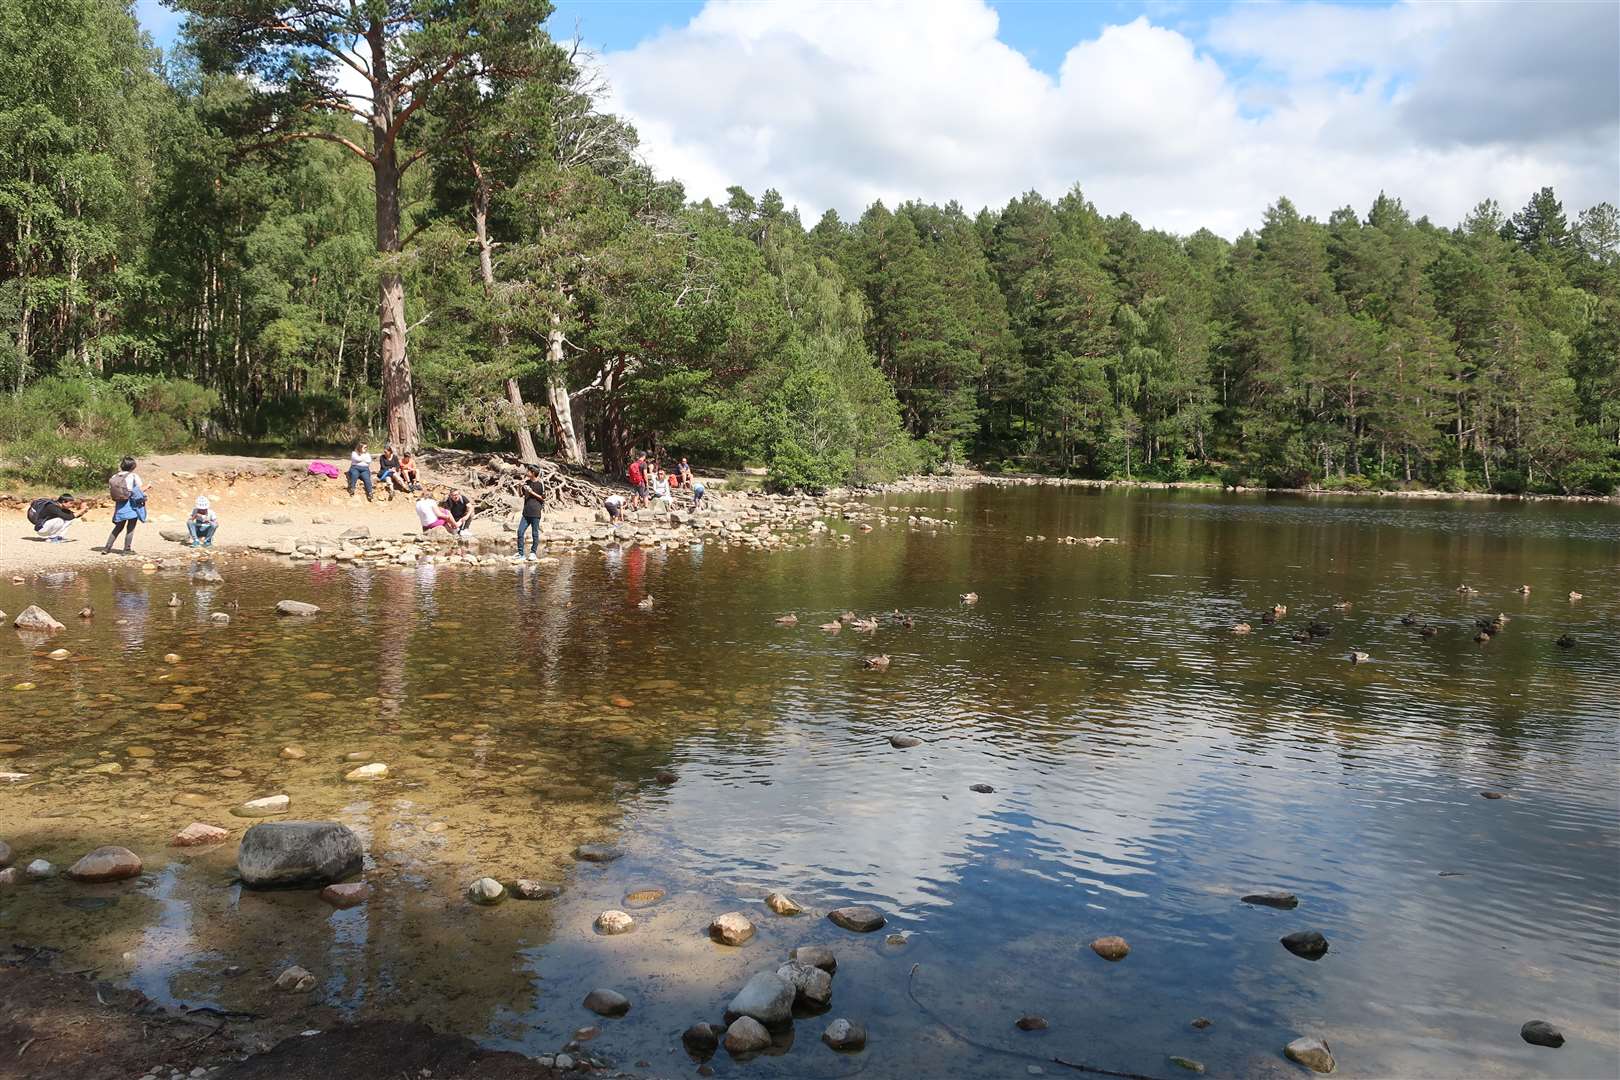 Loch an Eilein is a popular spot with visitors..